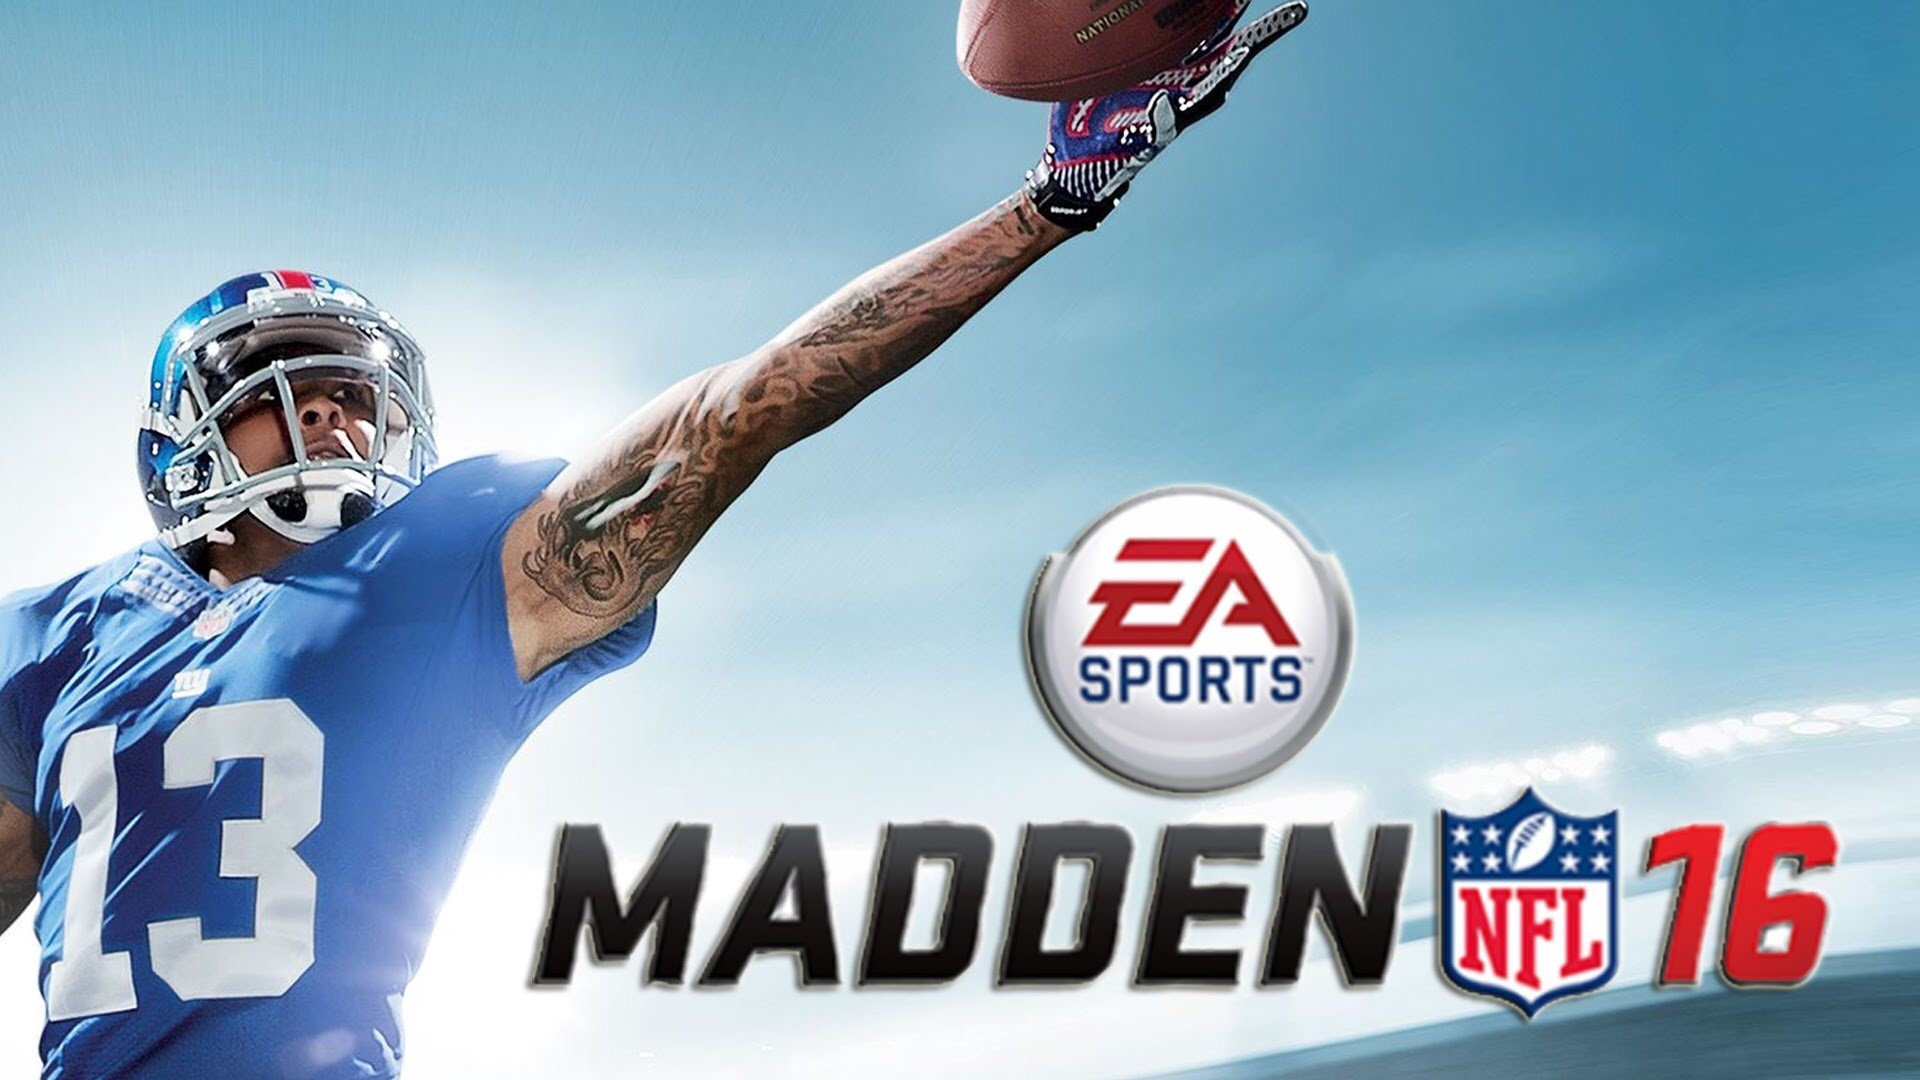 1920x1080 Madden NFL 16 HD Wallpapers